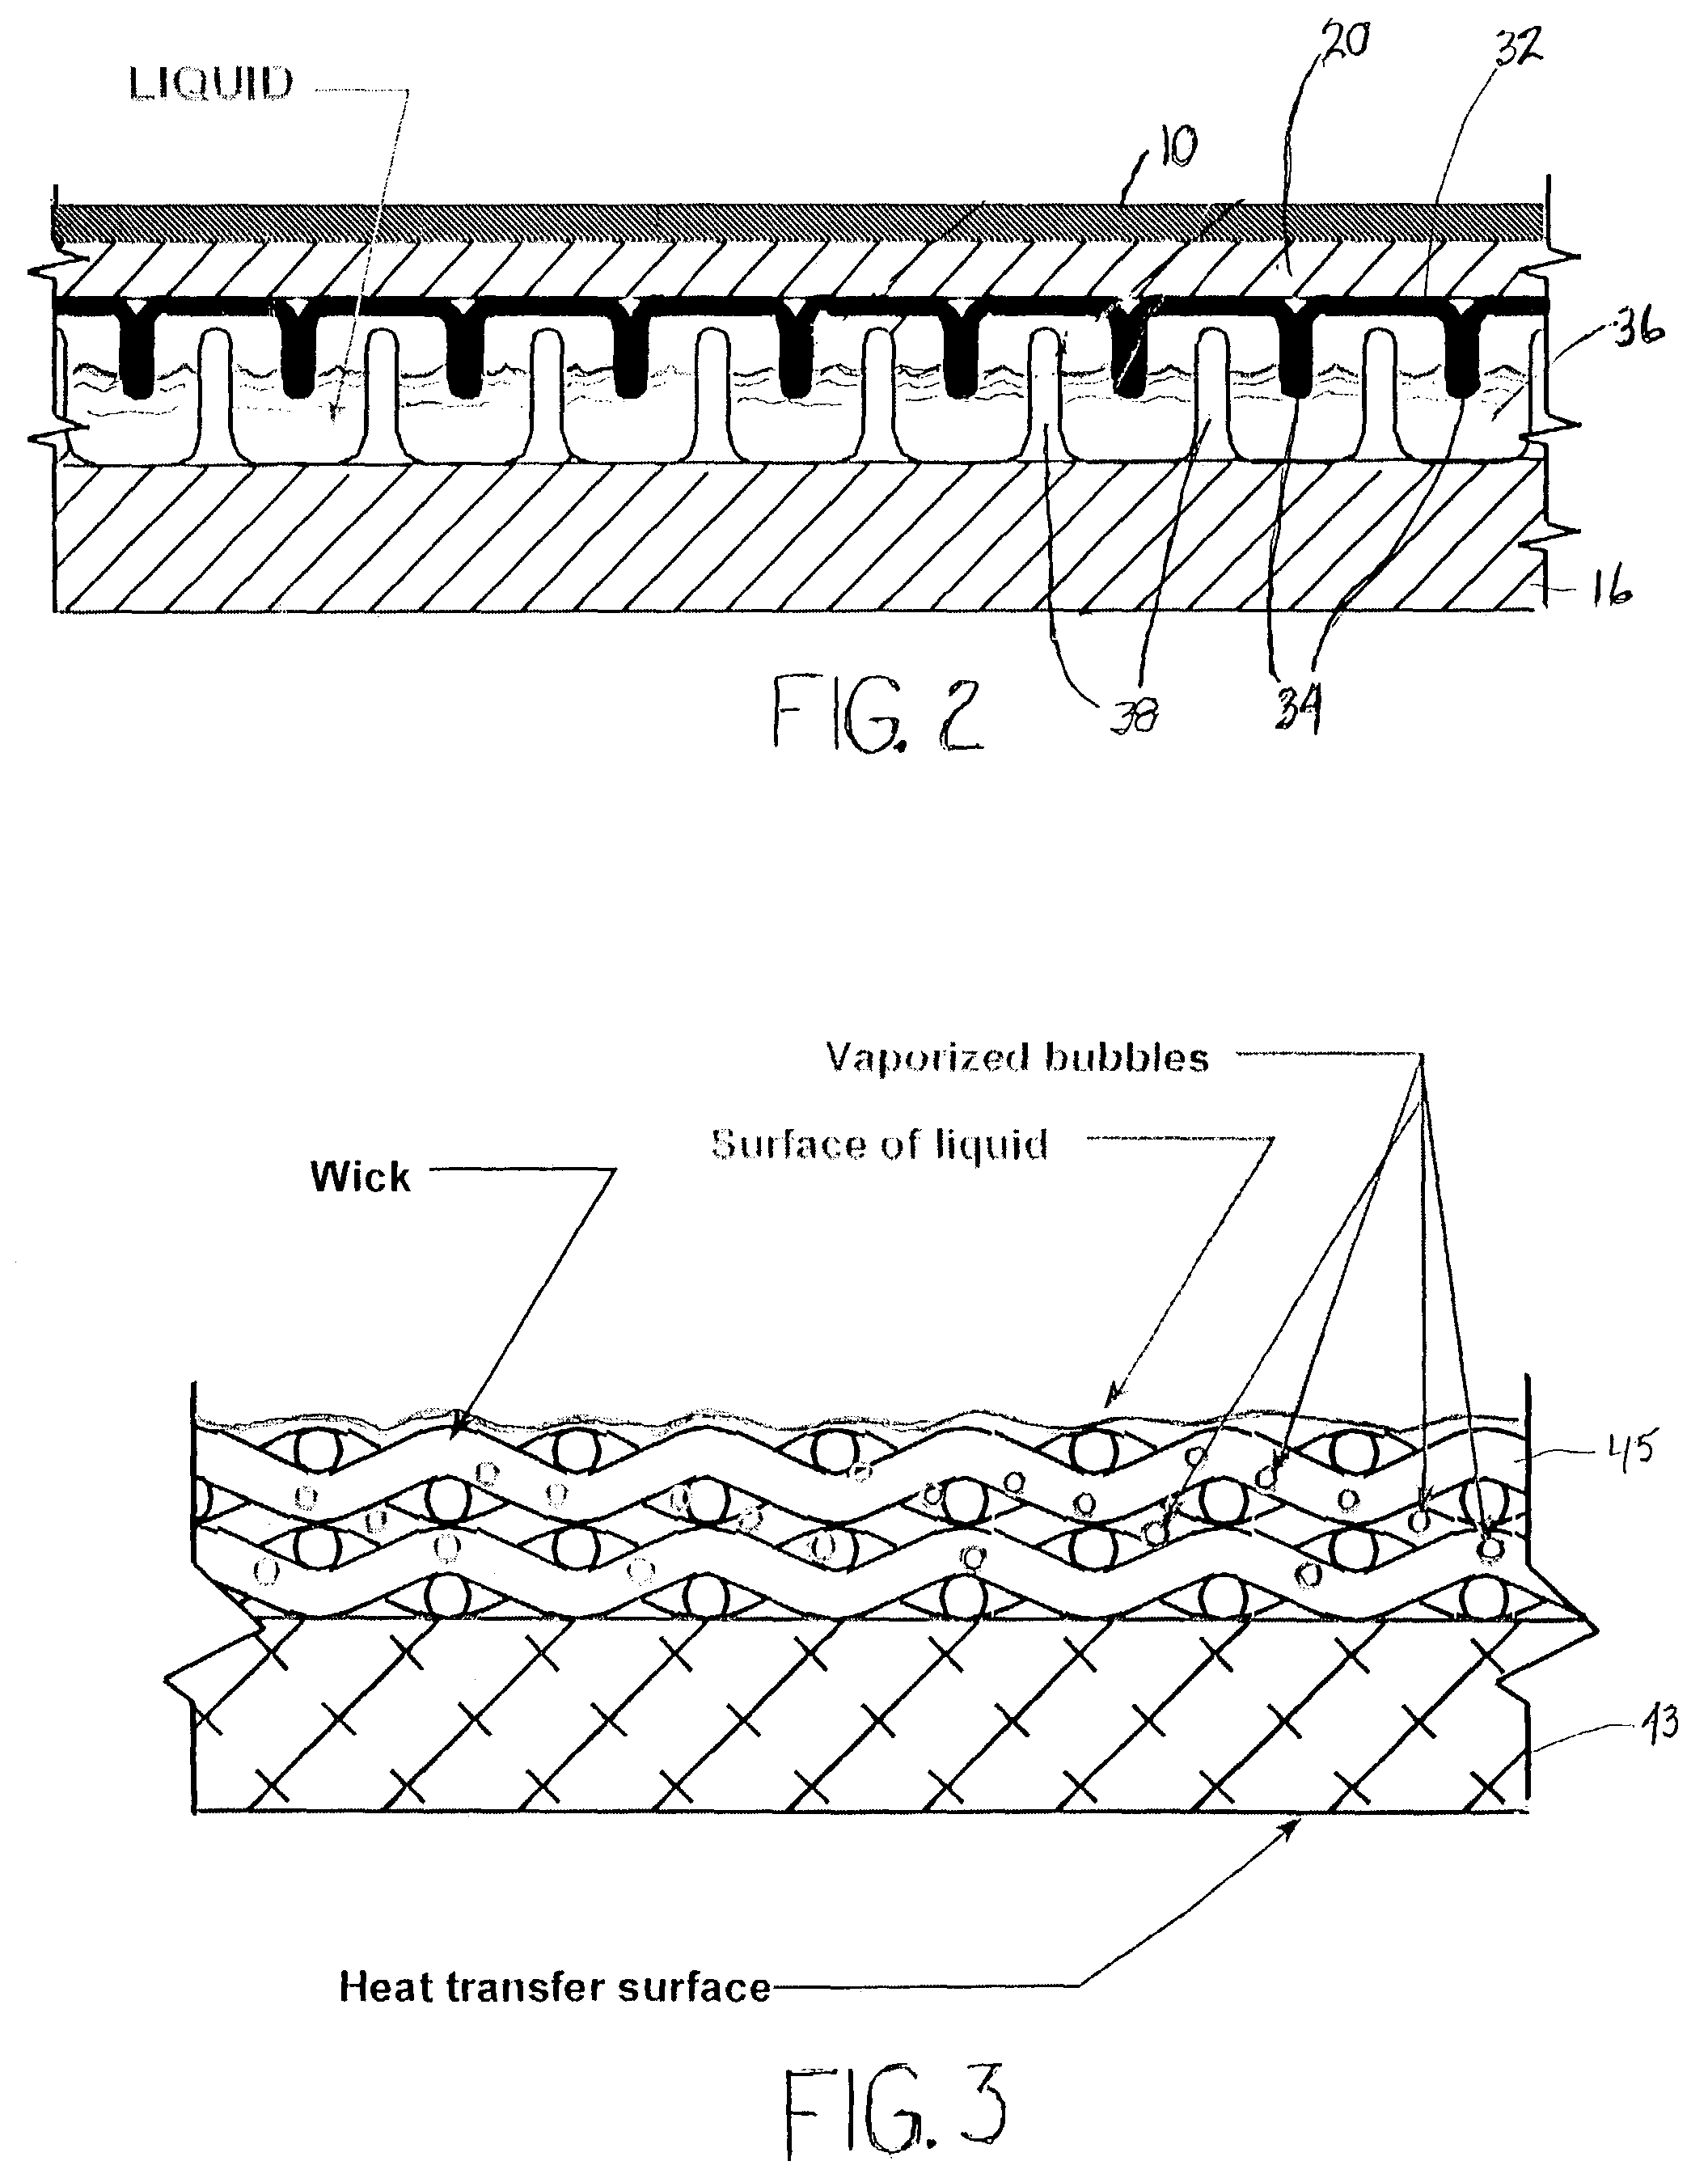 Lateral temperature equalizing system for large area surfaces during processing